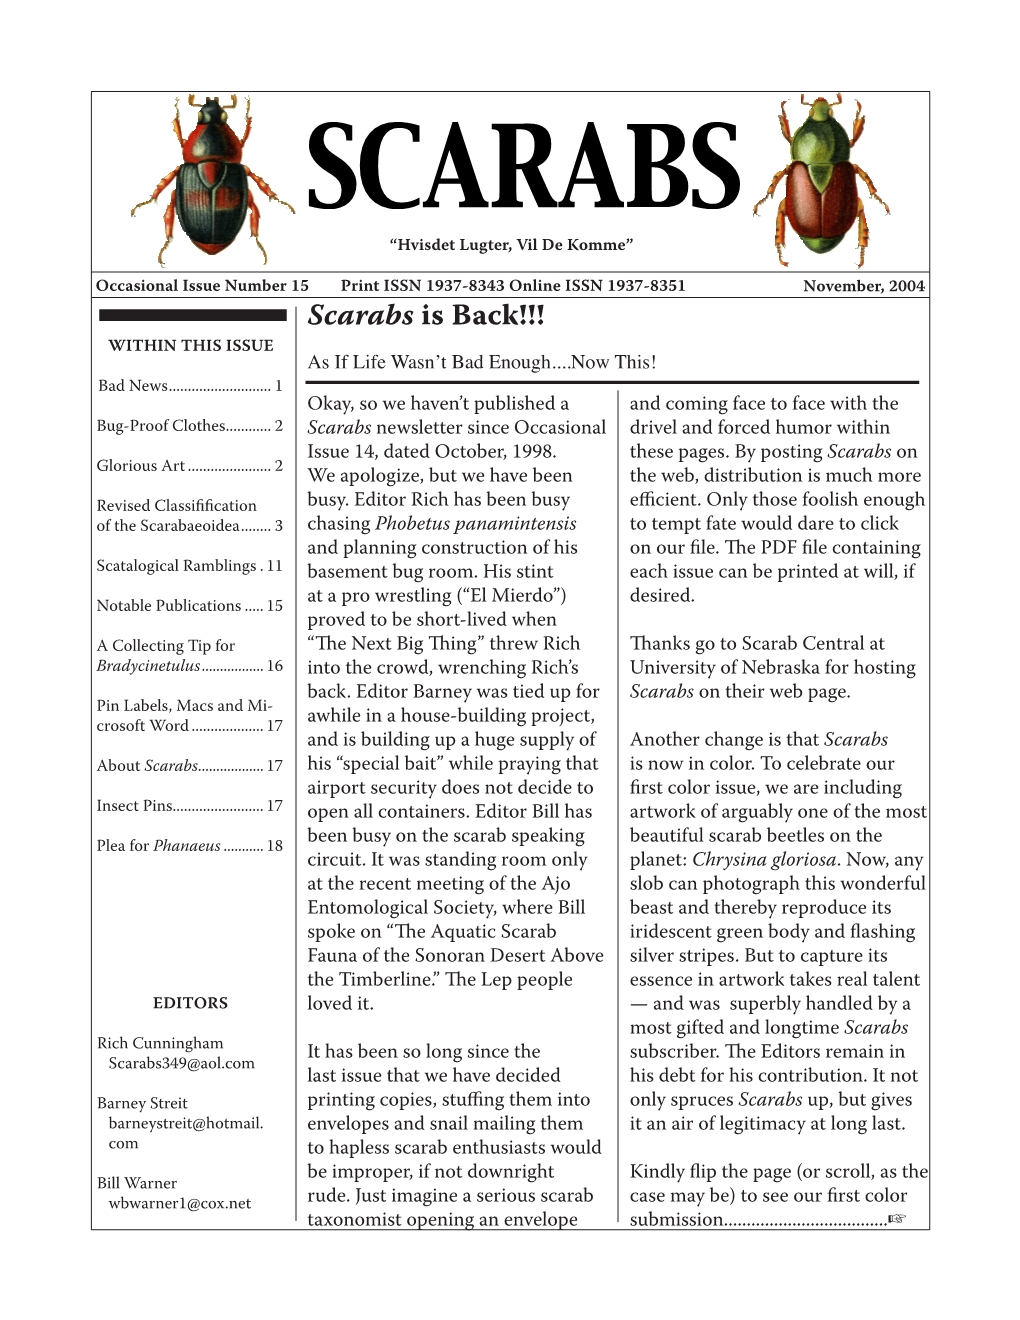 About Scarabs